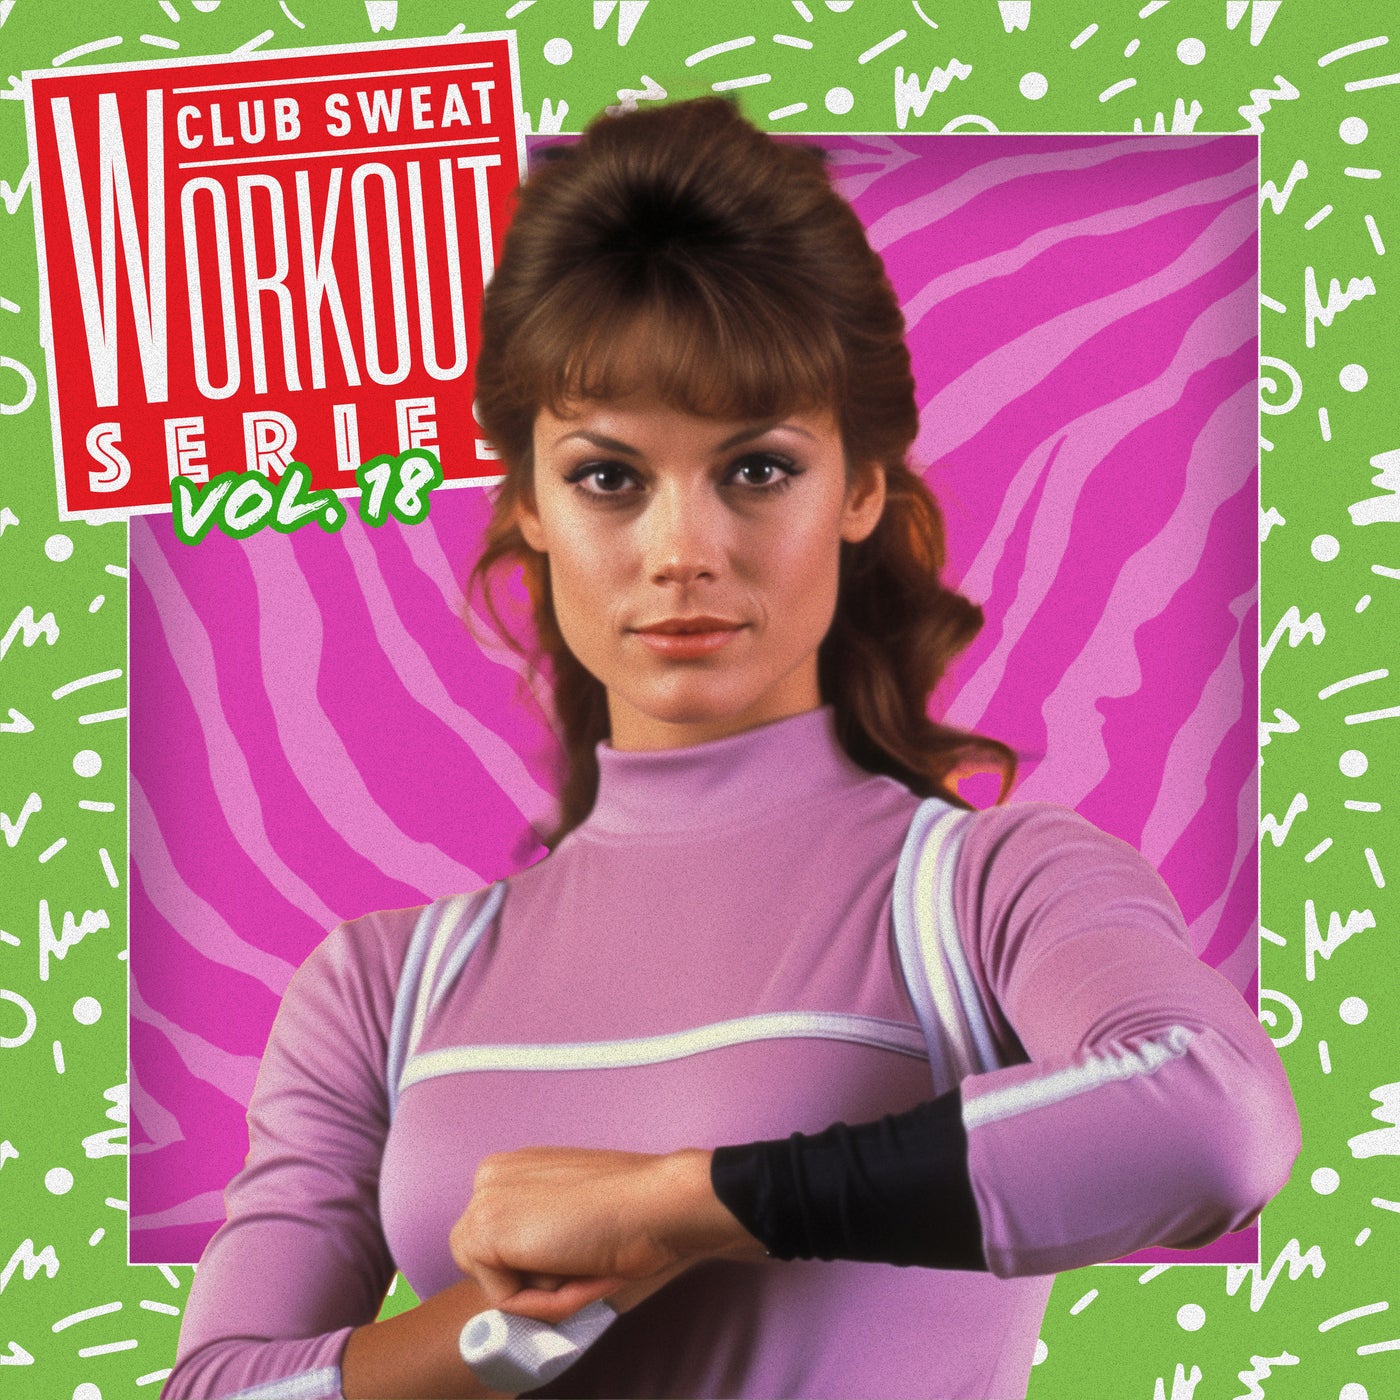 image cover: VA - Workout Series, Vol. 18 on Club Sweat